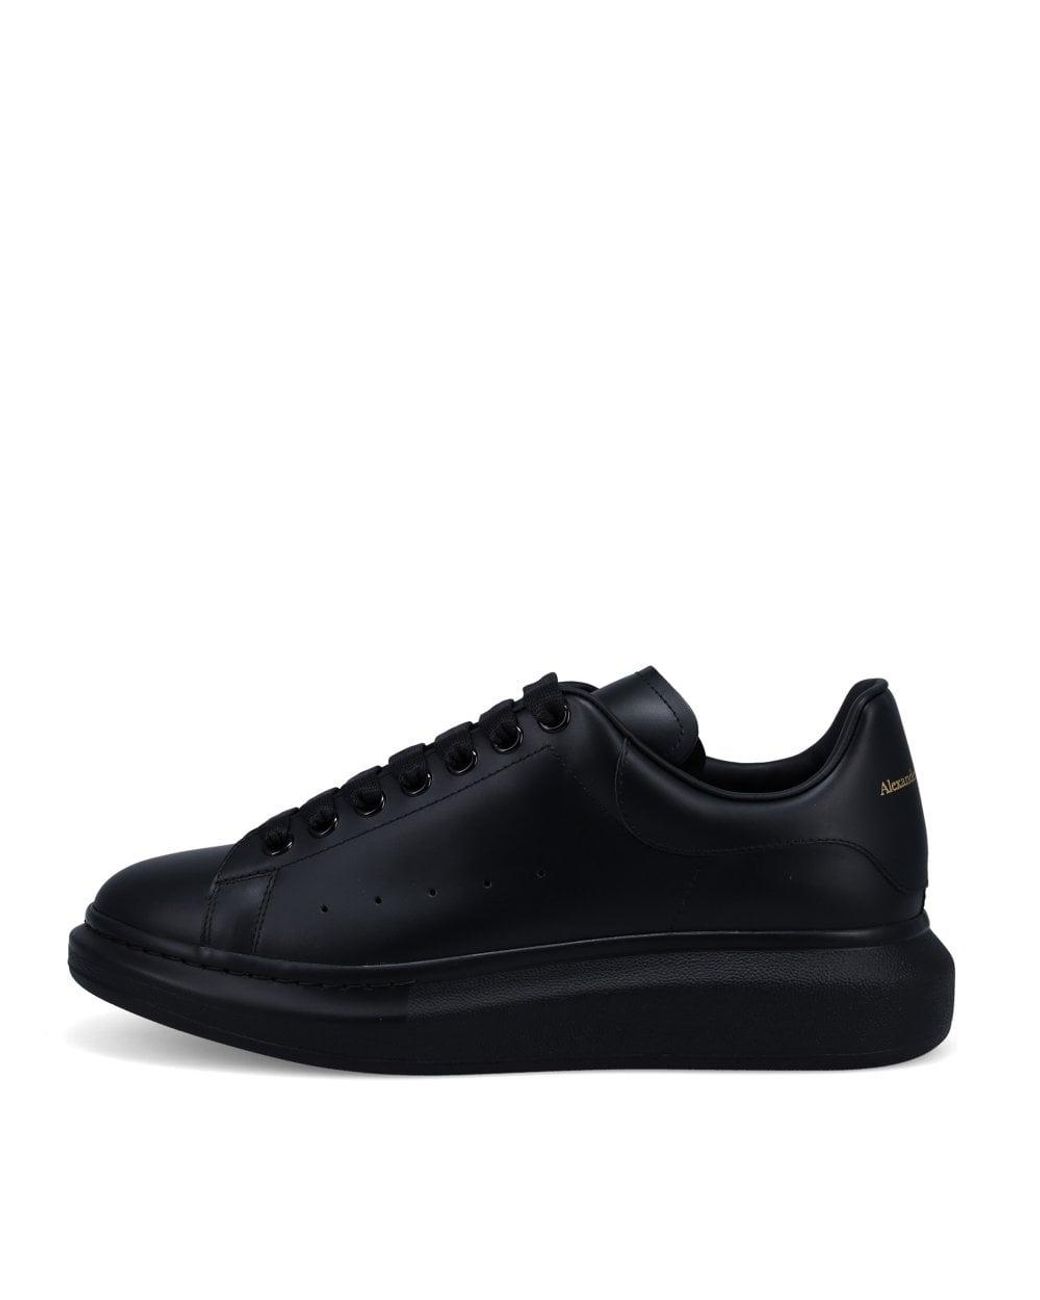 Alexander McQueen Oversized Clear Sole Leather Sneakers in Black/Black ( Black) for Men - Save 38% | Lyst